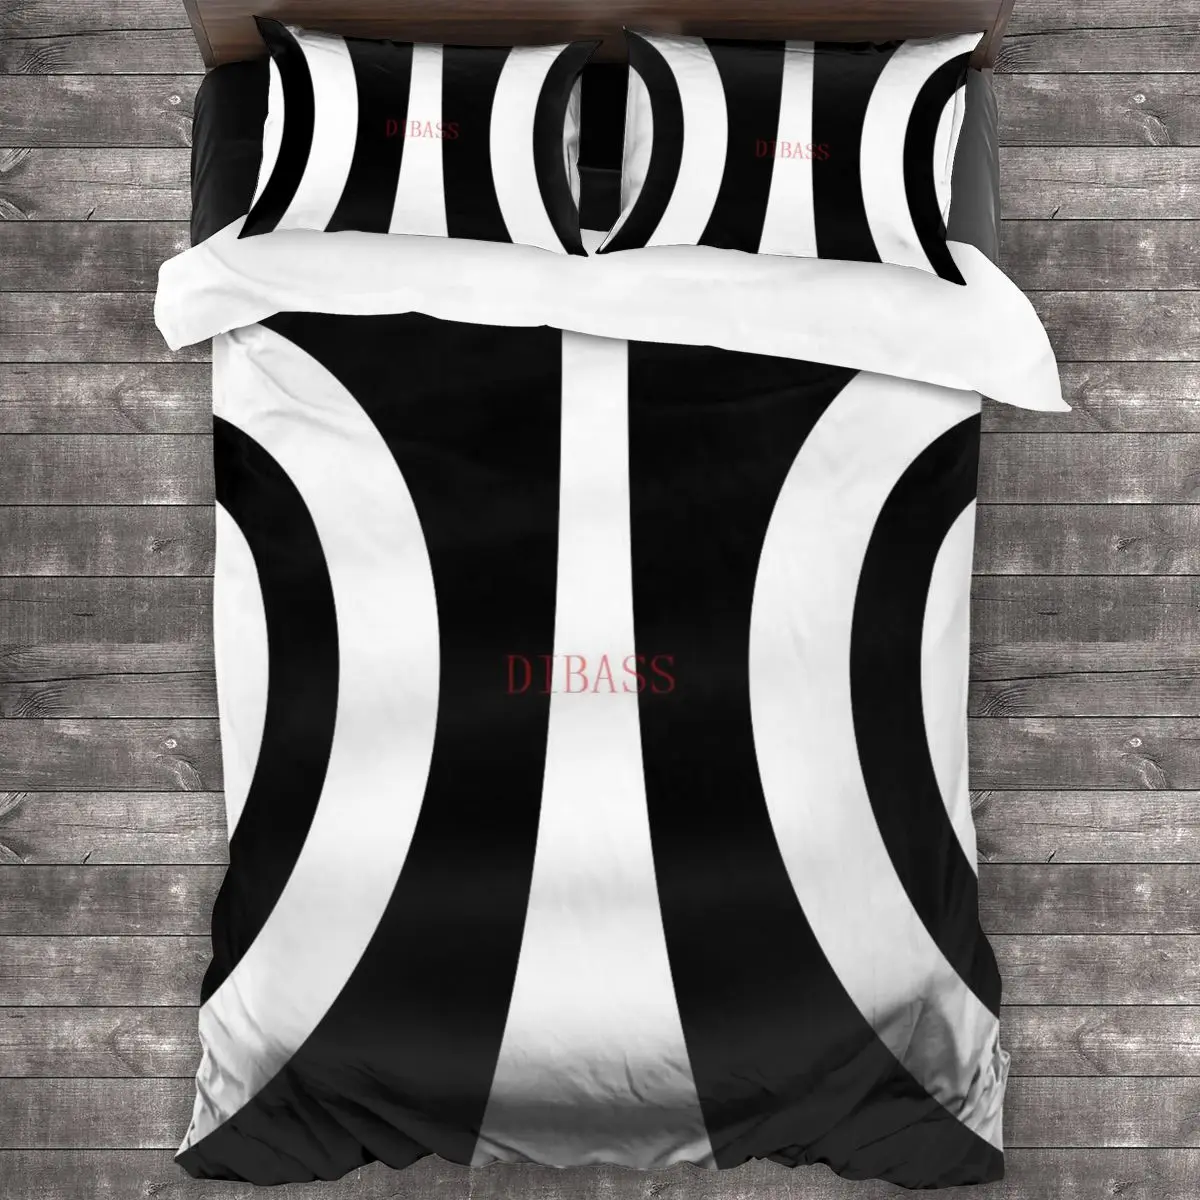 

White On Black Sixties Retro Mod Style Soft Microfiber Comforter Set with 2 Pillowcase Quilt Cover With Zipper Closure